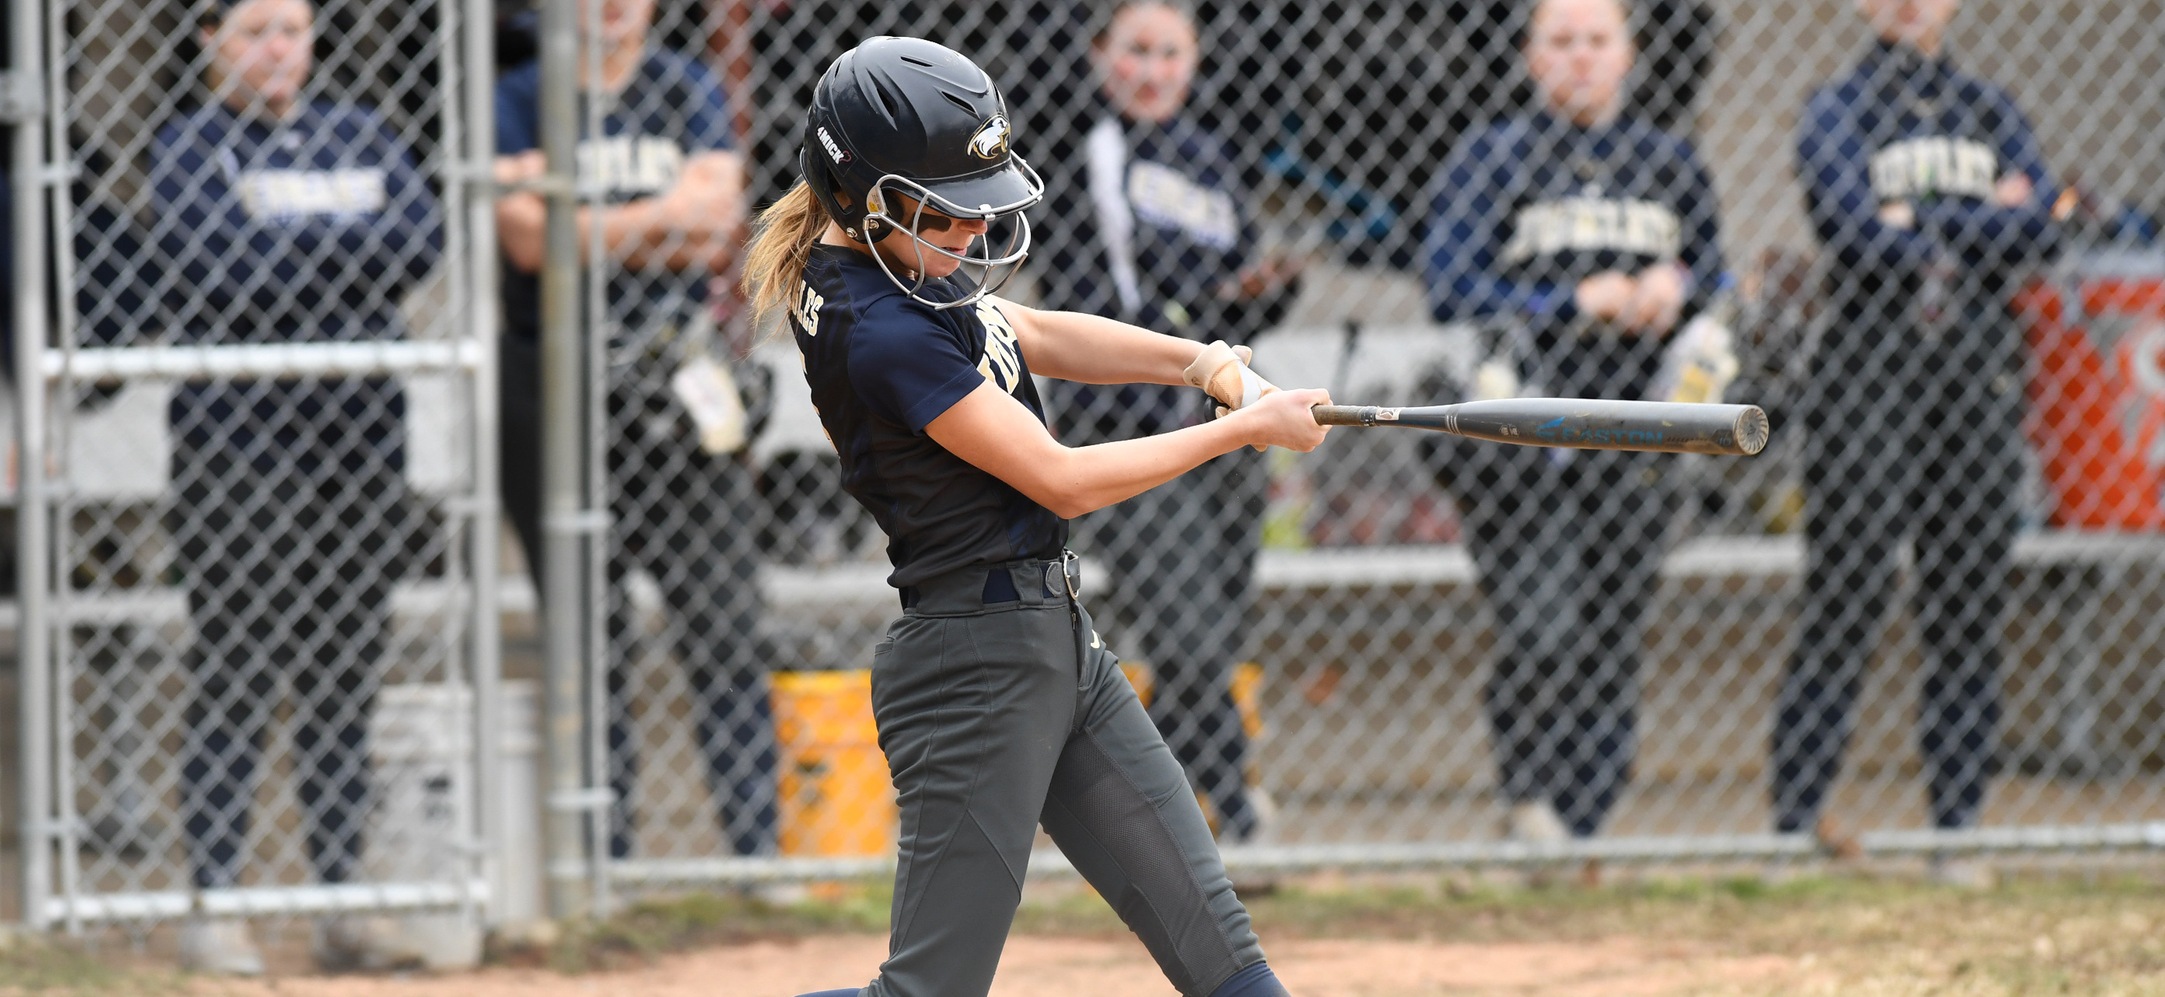 Natalie Krug went 2-4 with a run scored in game one.